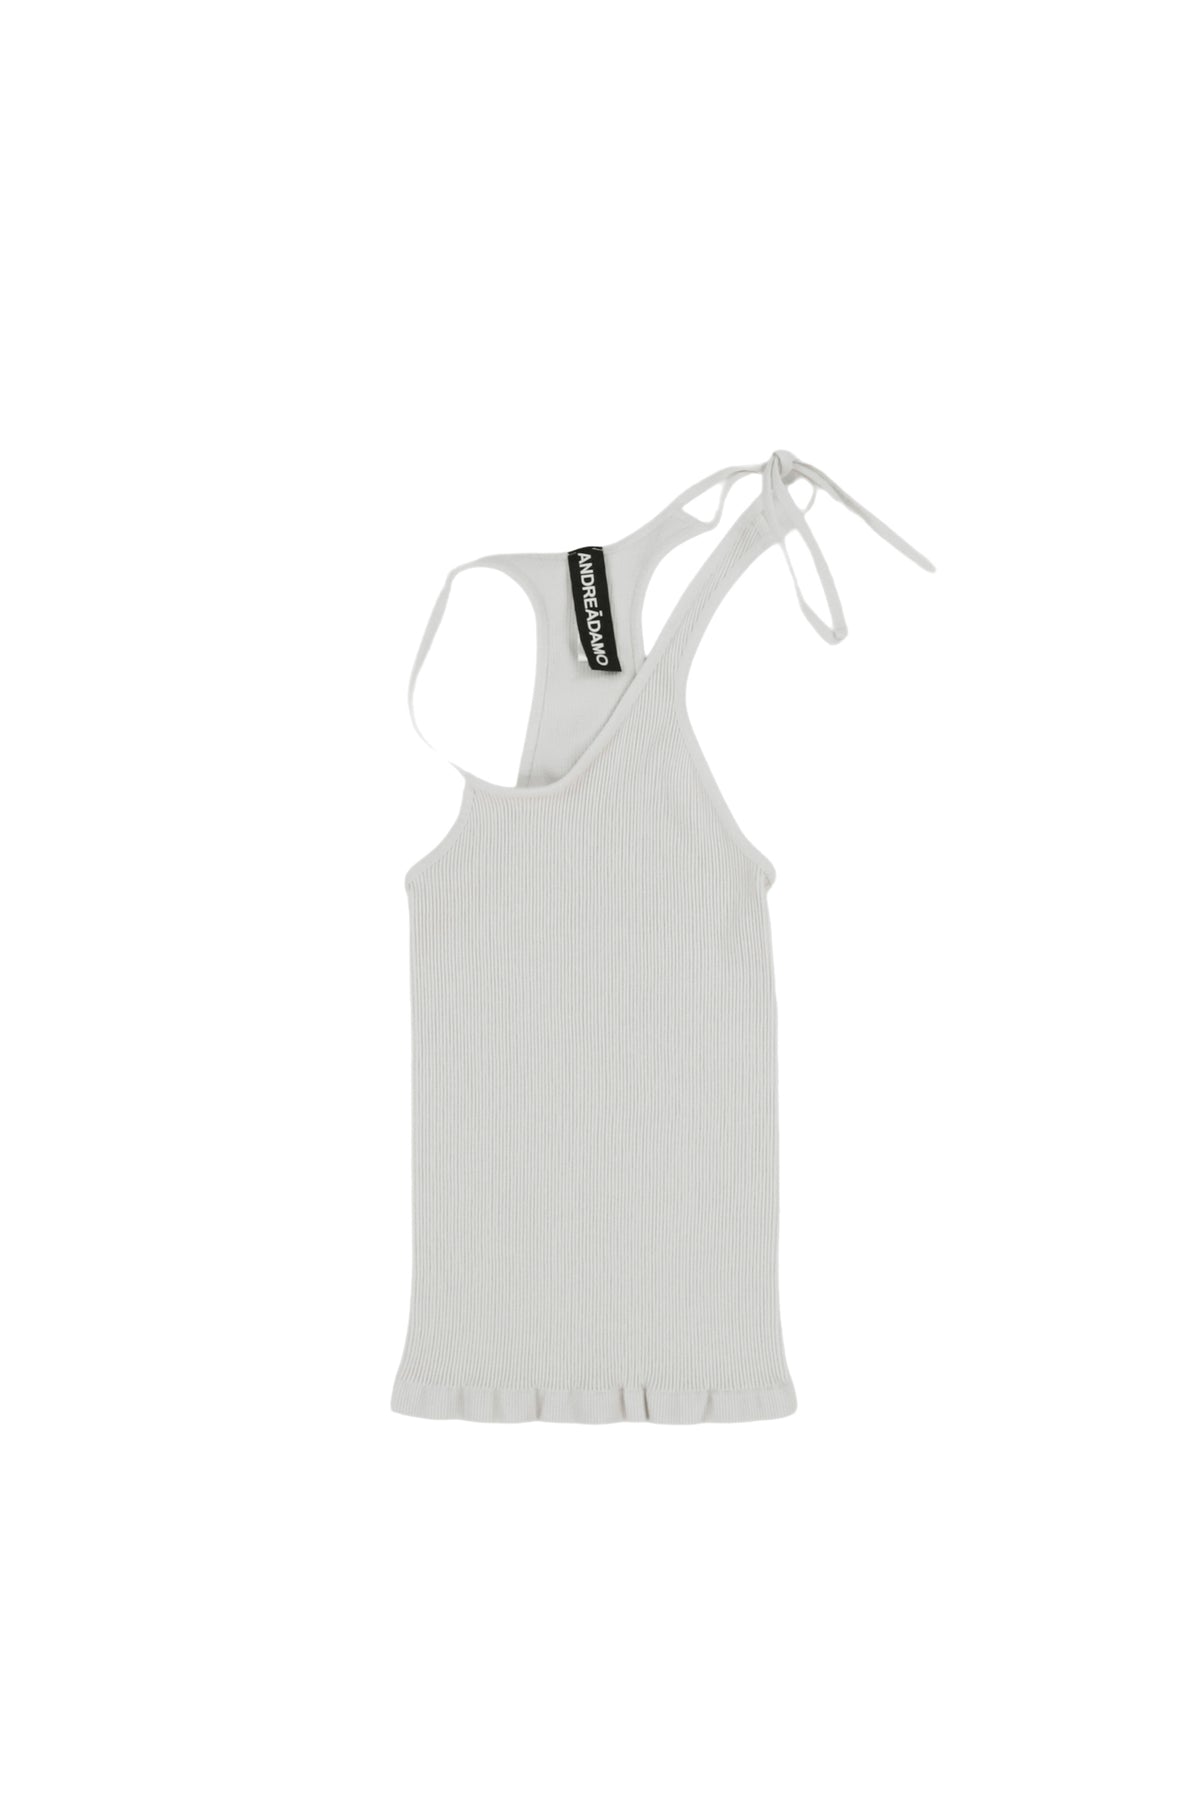 RIBBED JERSEY TANK TOP / IVR